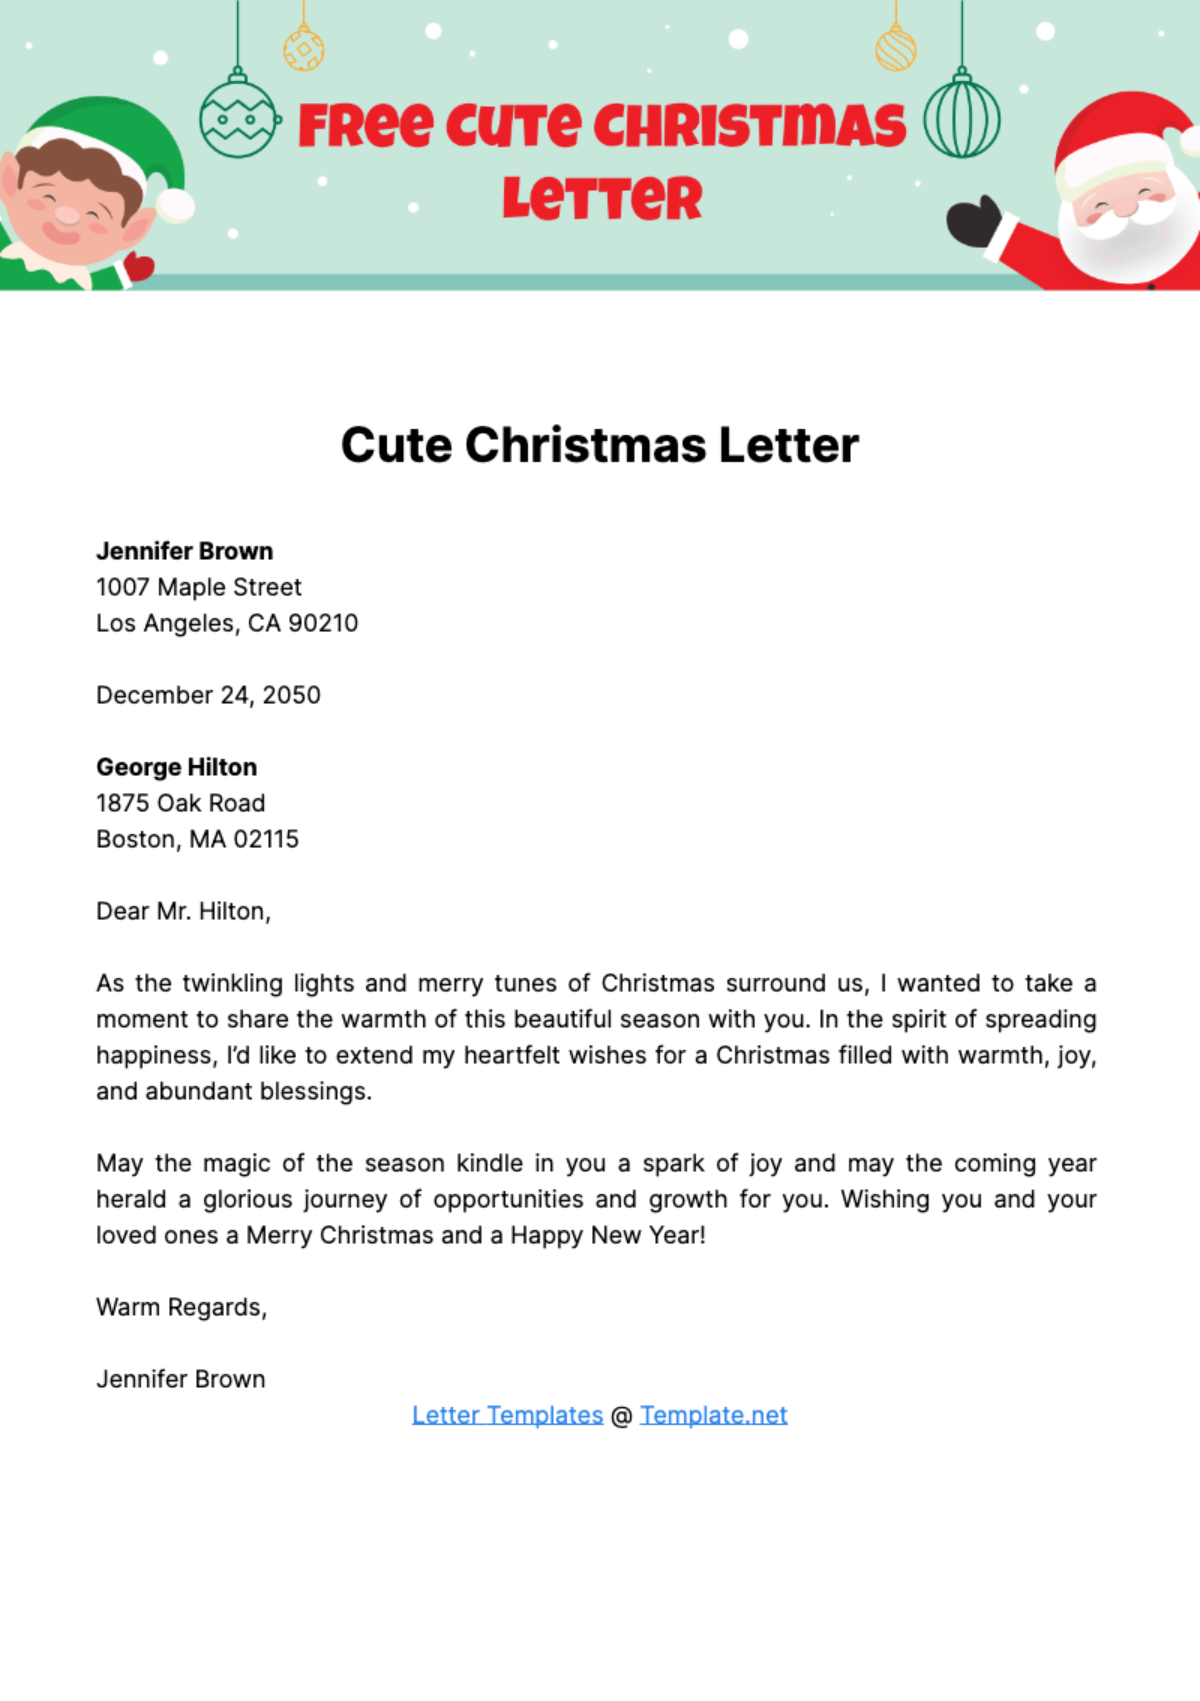 Free Cute Christmas Letter Template